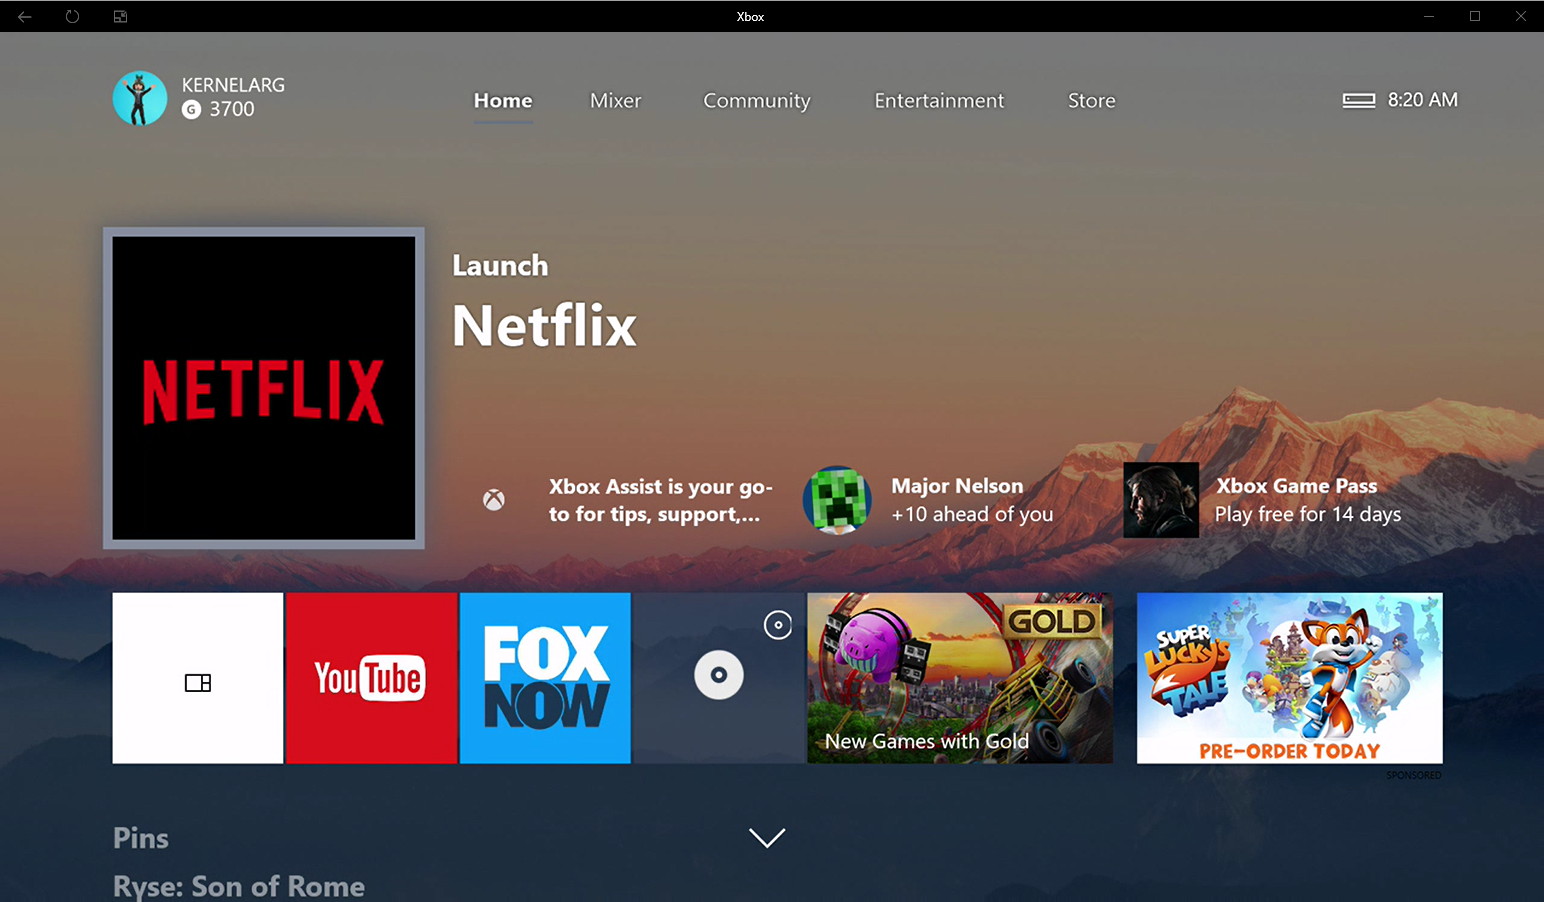 Go to the Xbox One home screen
Select "My Games and Apps"